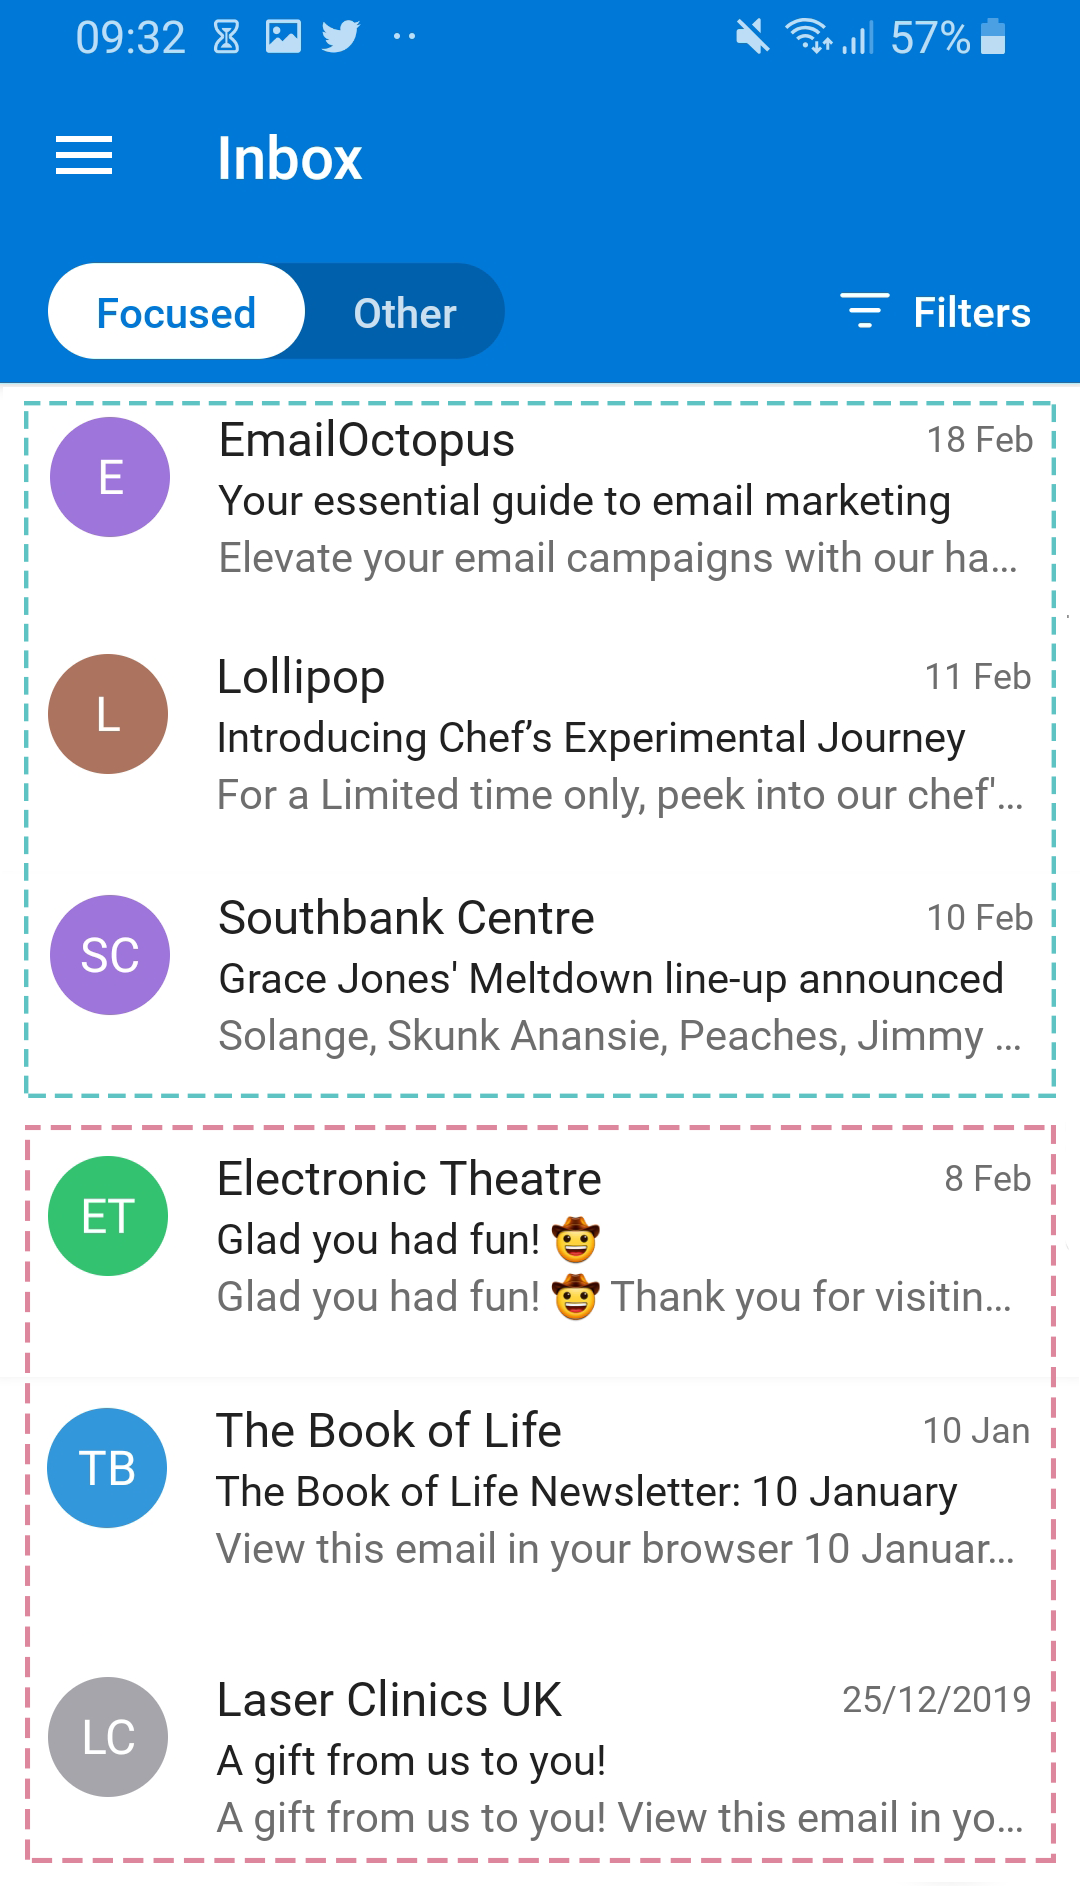 Examples of effective and not-so-effective pre-header text in emails